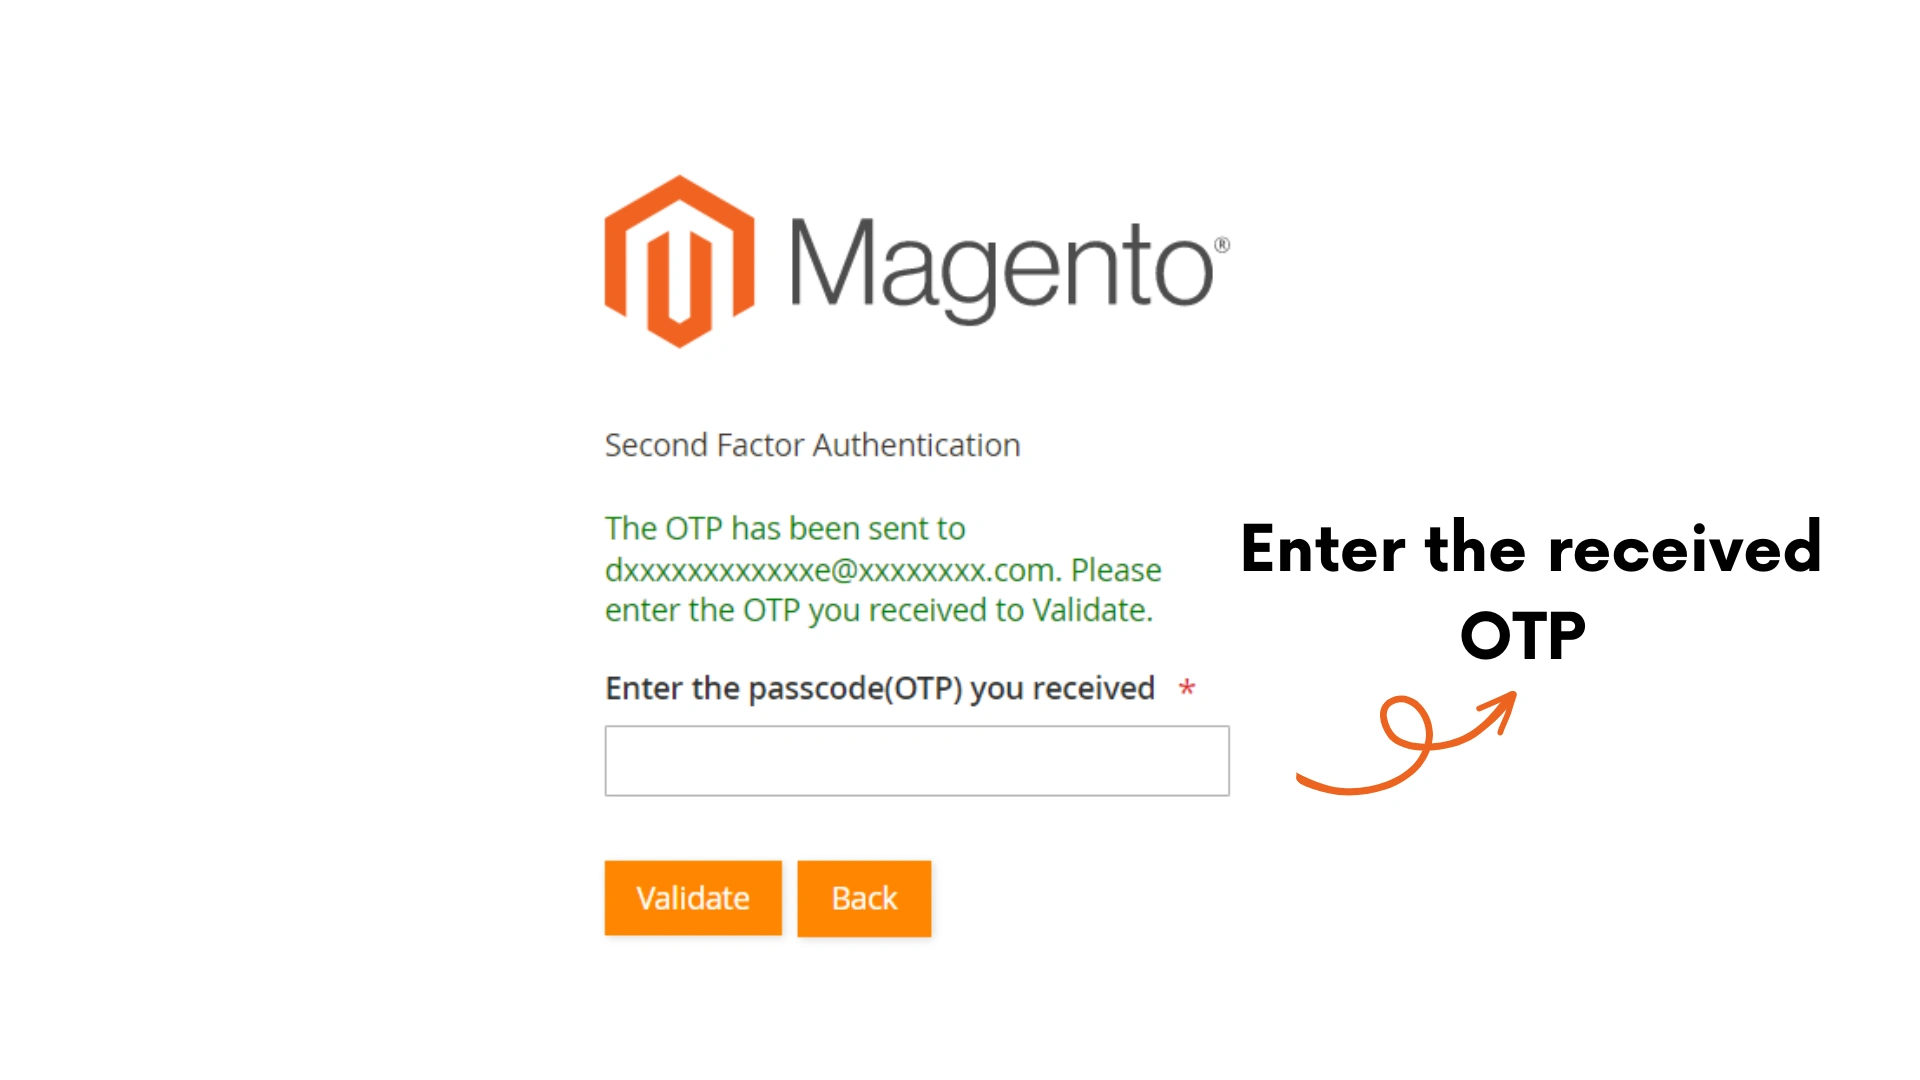 OTP over email for magento | OTP over email verification magento | Magento otp over email | Magento otp over email verificationification | Magento 2 Factor Authentication (2fa) (mfa) OTP over SMS registration | Magento OTP over SMS verification | magento sms verification